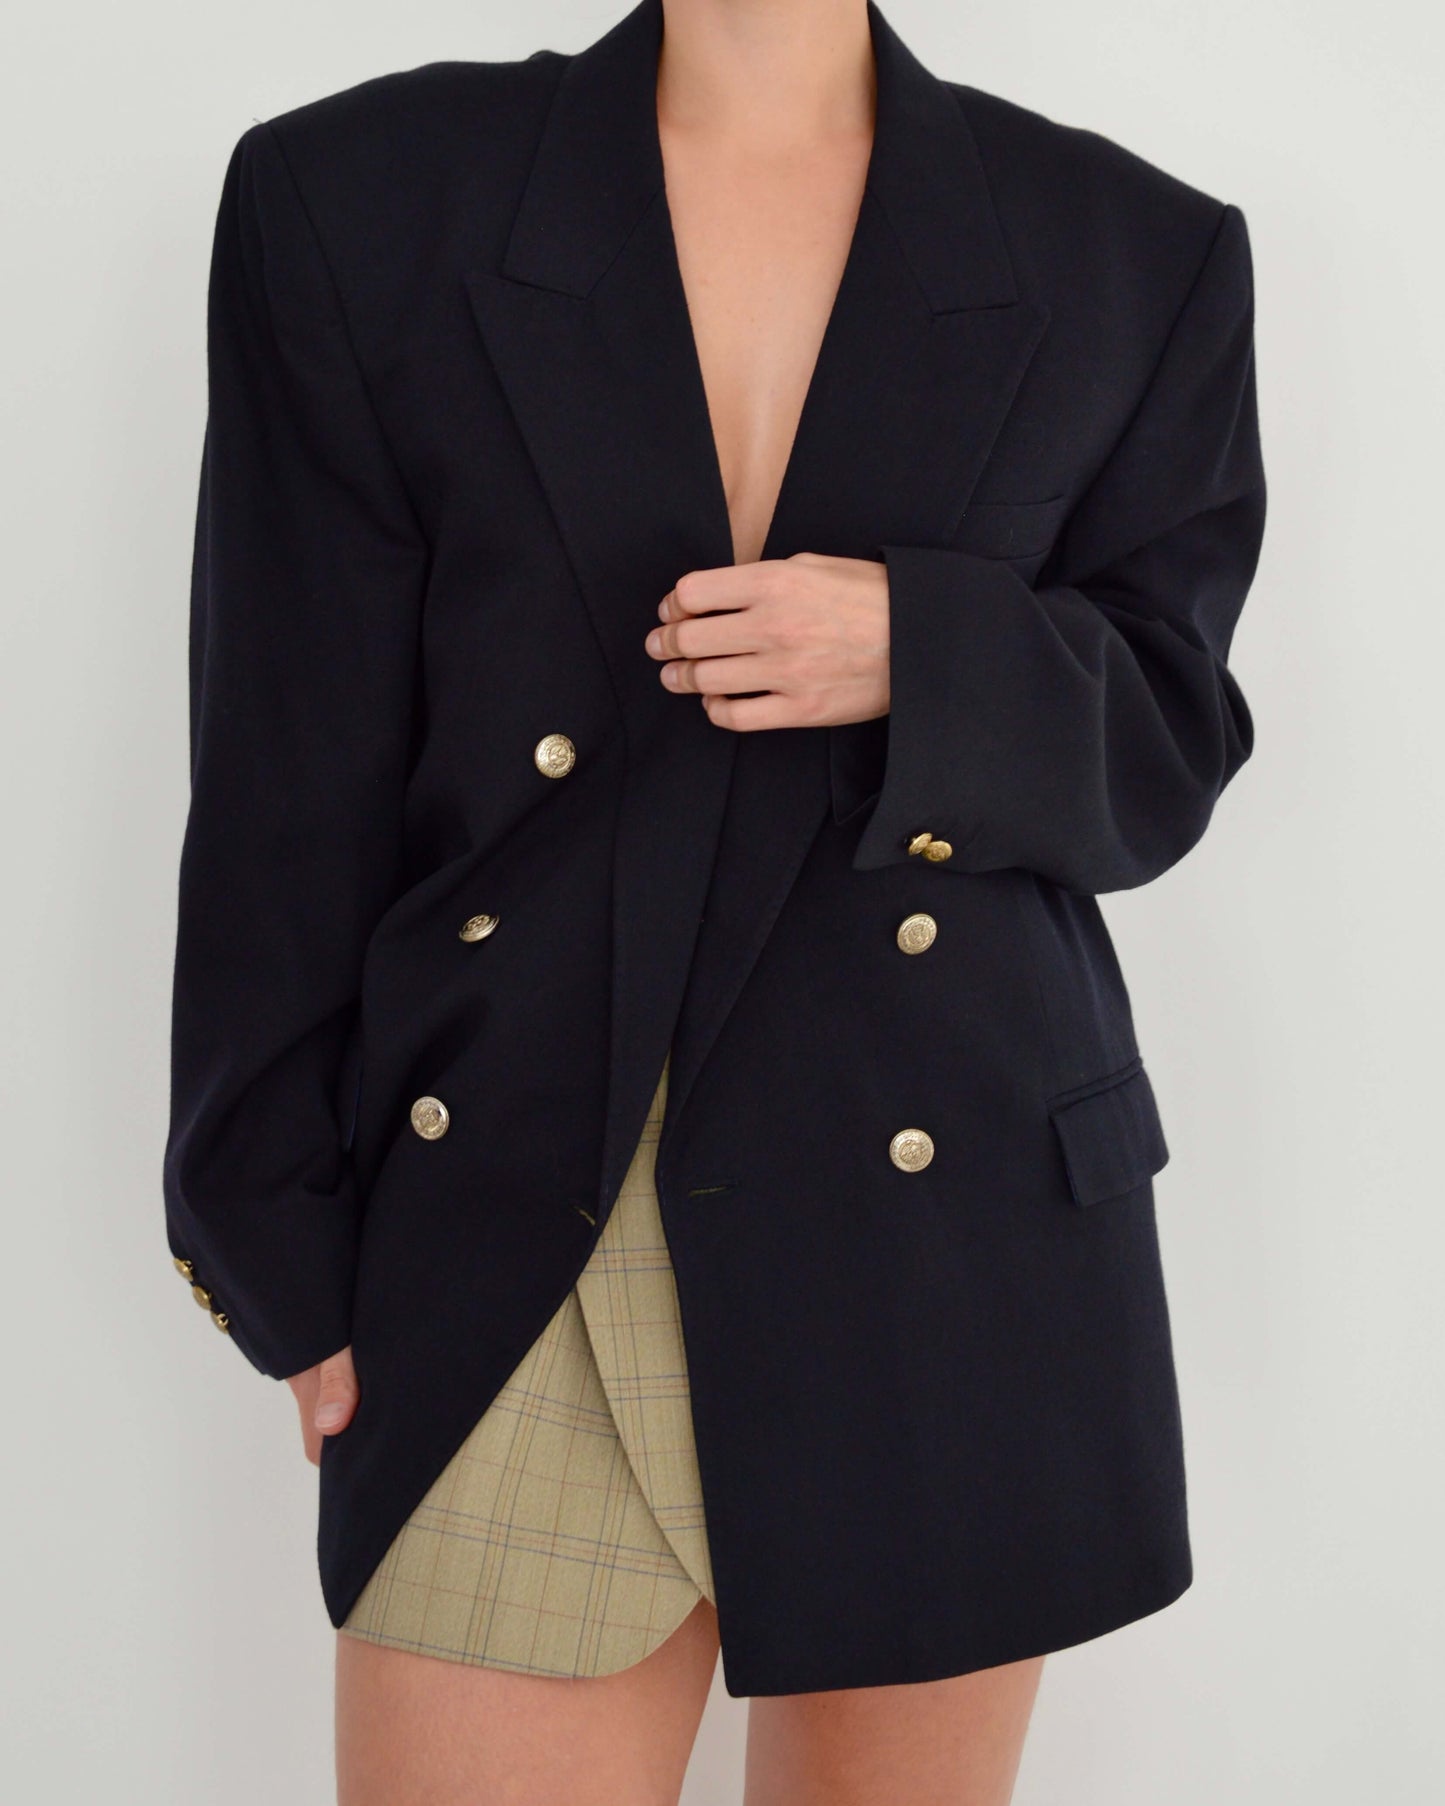 Jacket - double breasted golden buttons (M/XL)